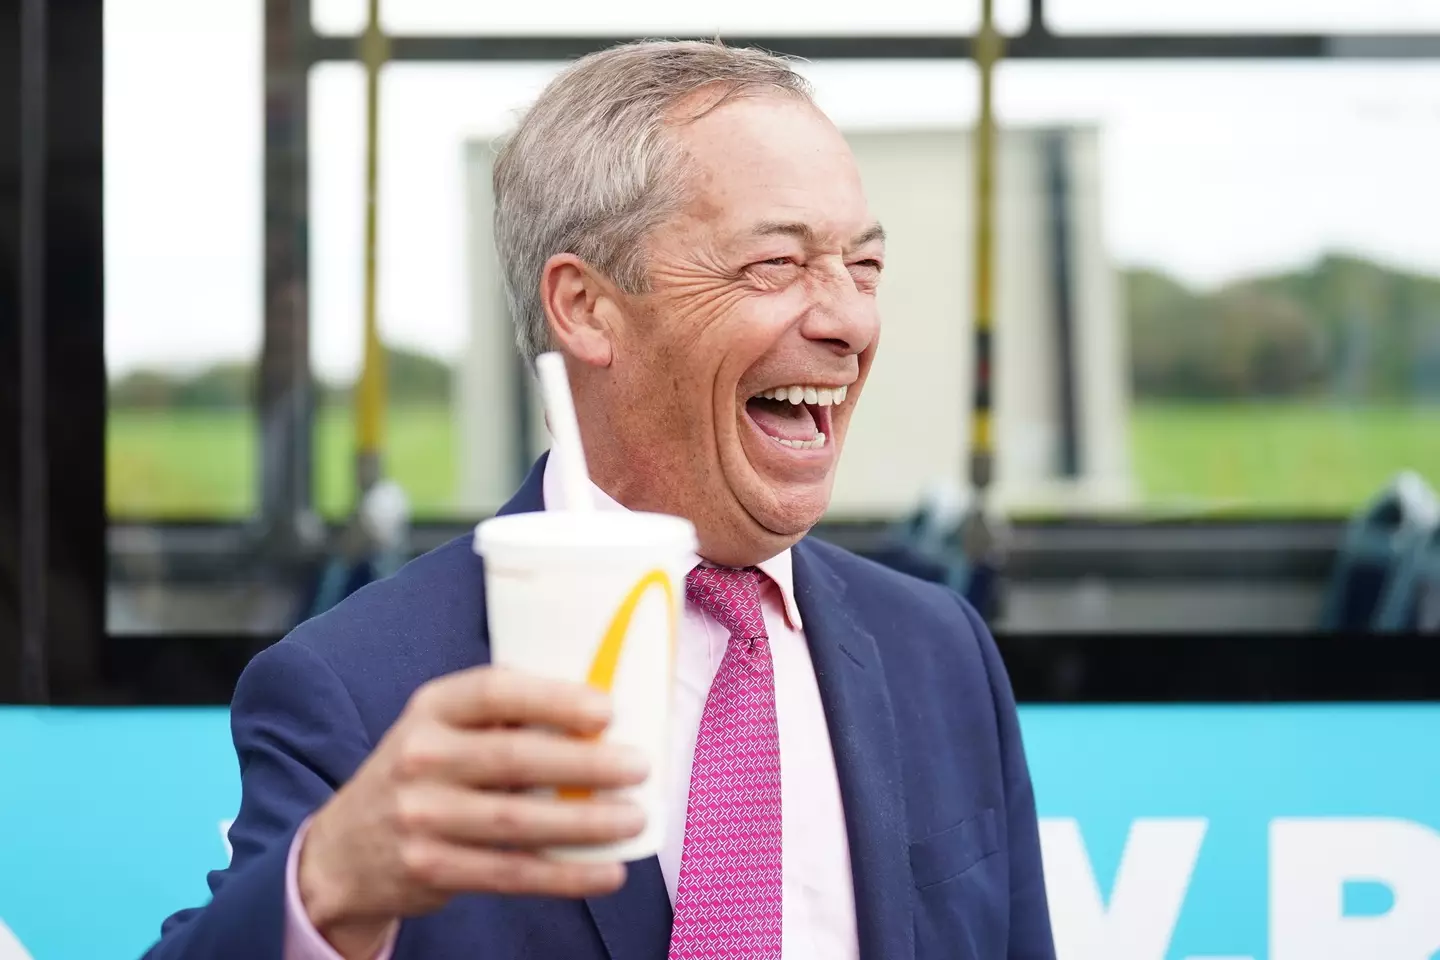 Farage was all smiles beforehand. (PA)